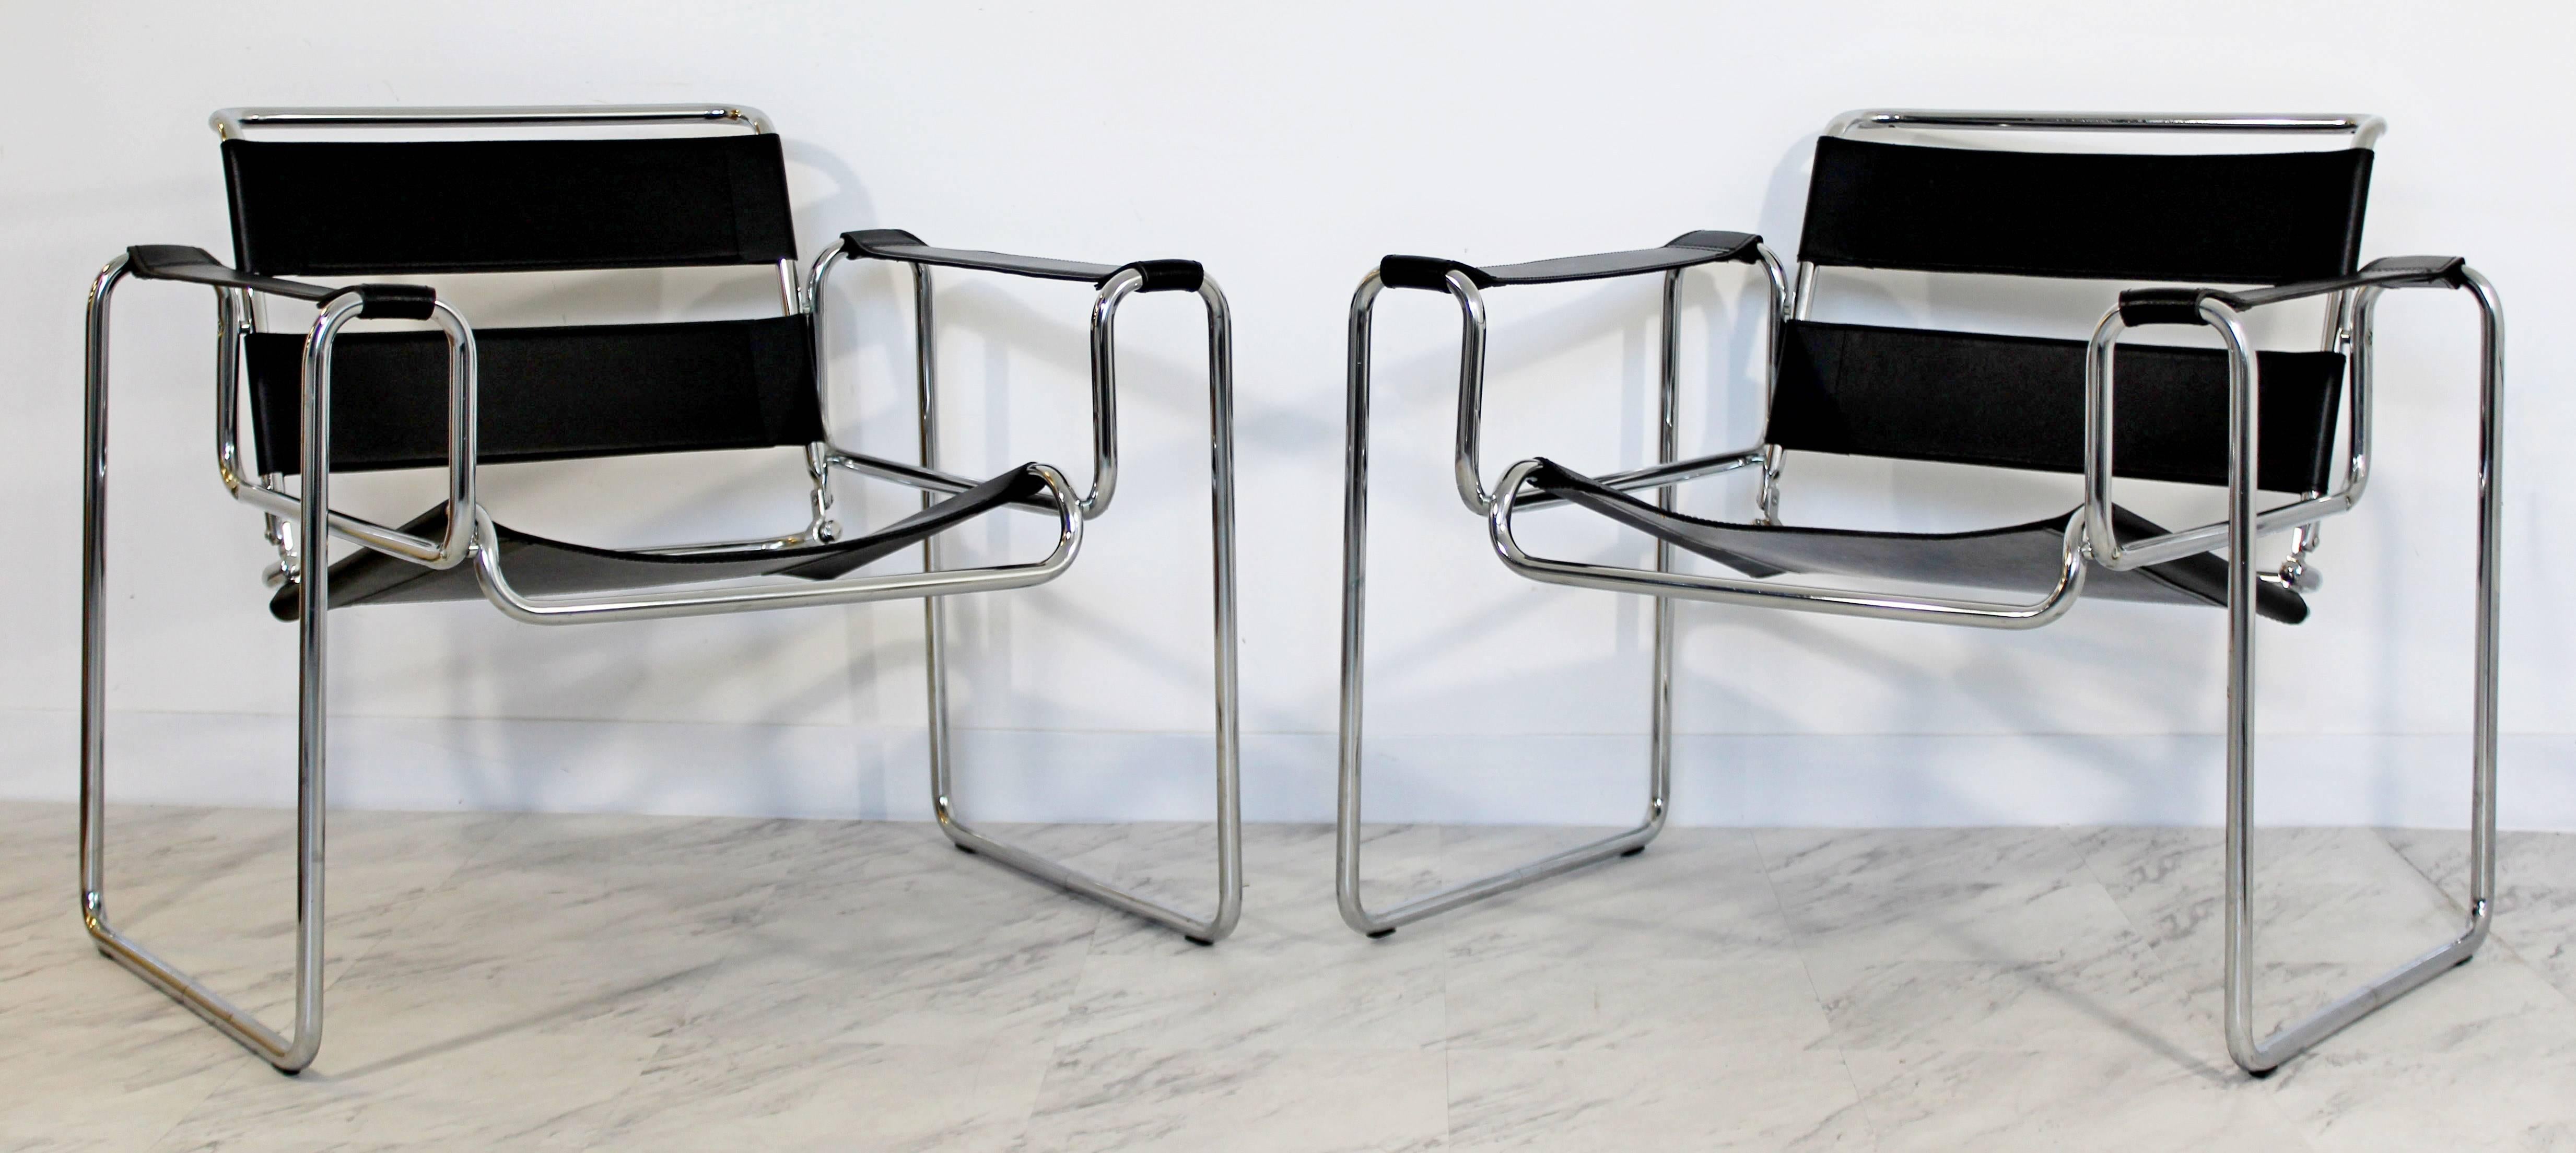 For your consideration is a gorgeous pair of original vintage Marcel Breuer for Stendig Wassily lounge chairs, made of black leather and chrome, circa 1960s. In excellent condition. The dimensions are 32